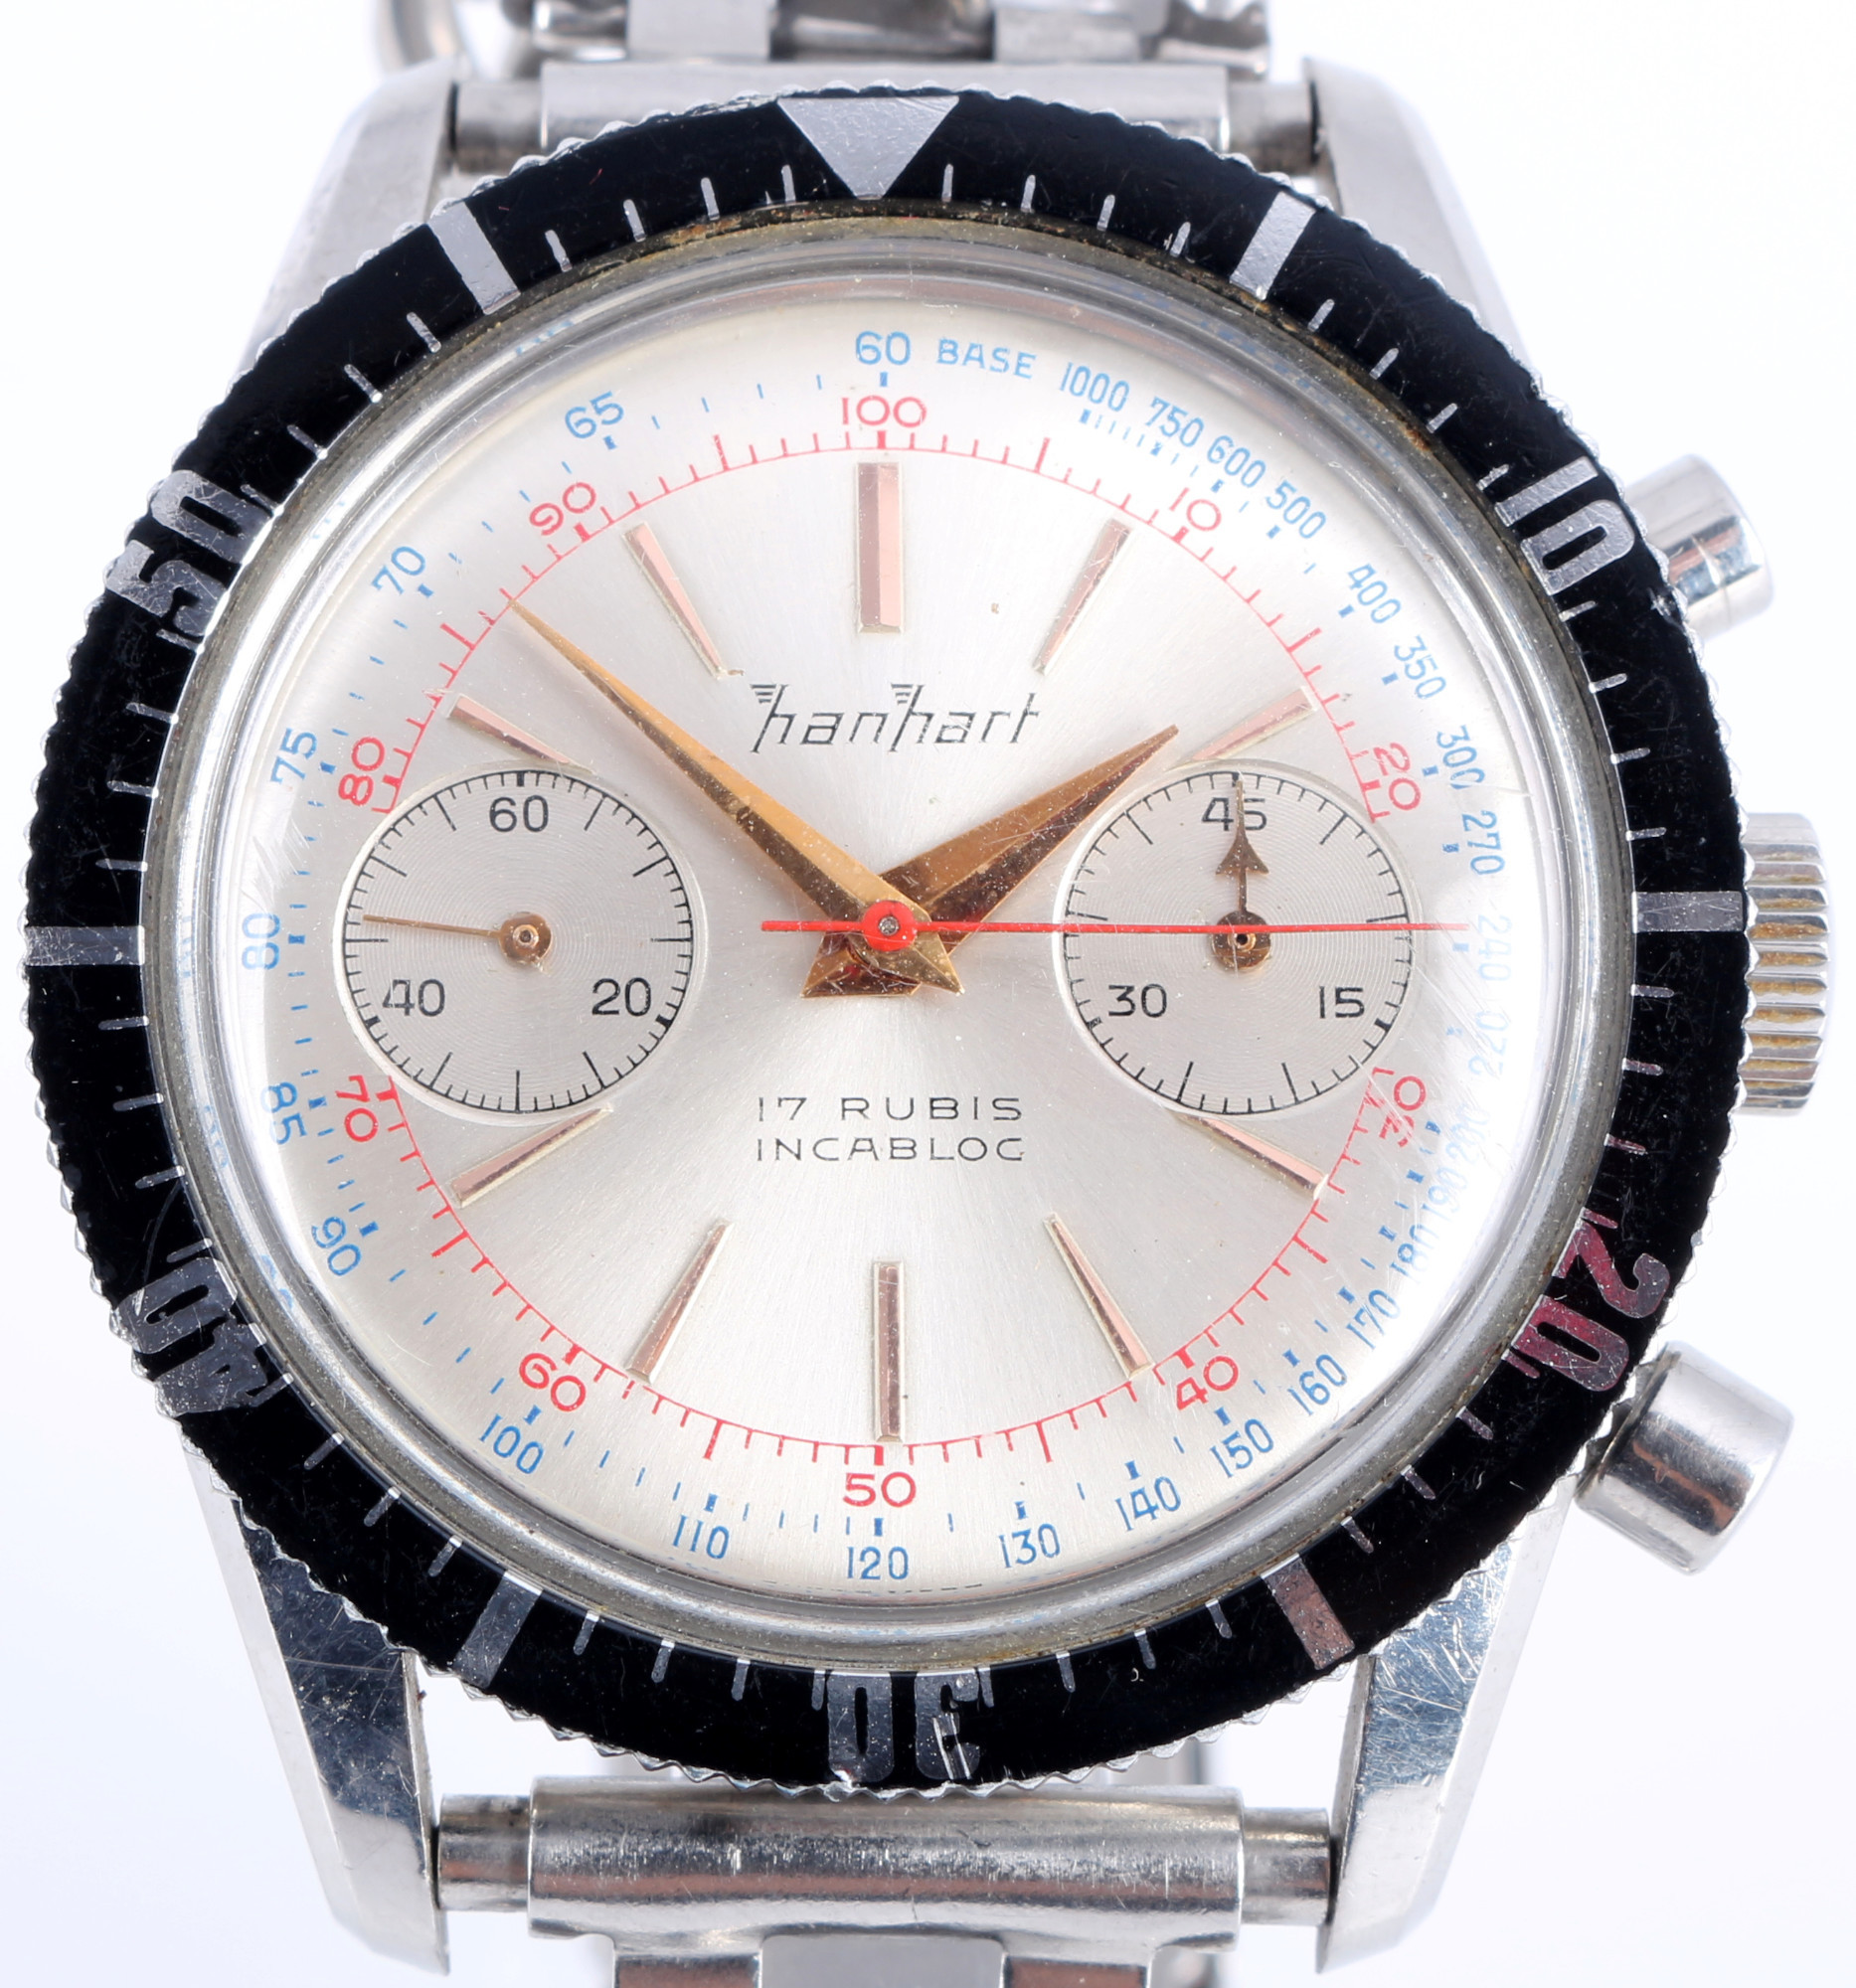 Hanhart Chronograph Pilot's Watch 415 ES with Lemania movement, - Image 2 of 7